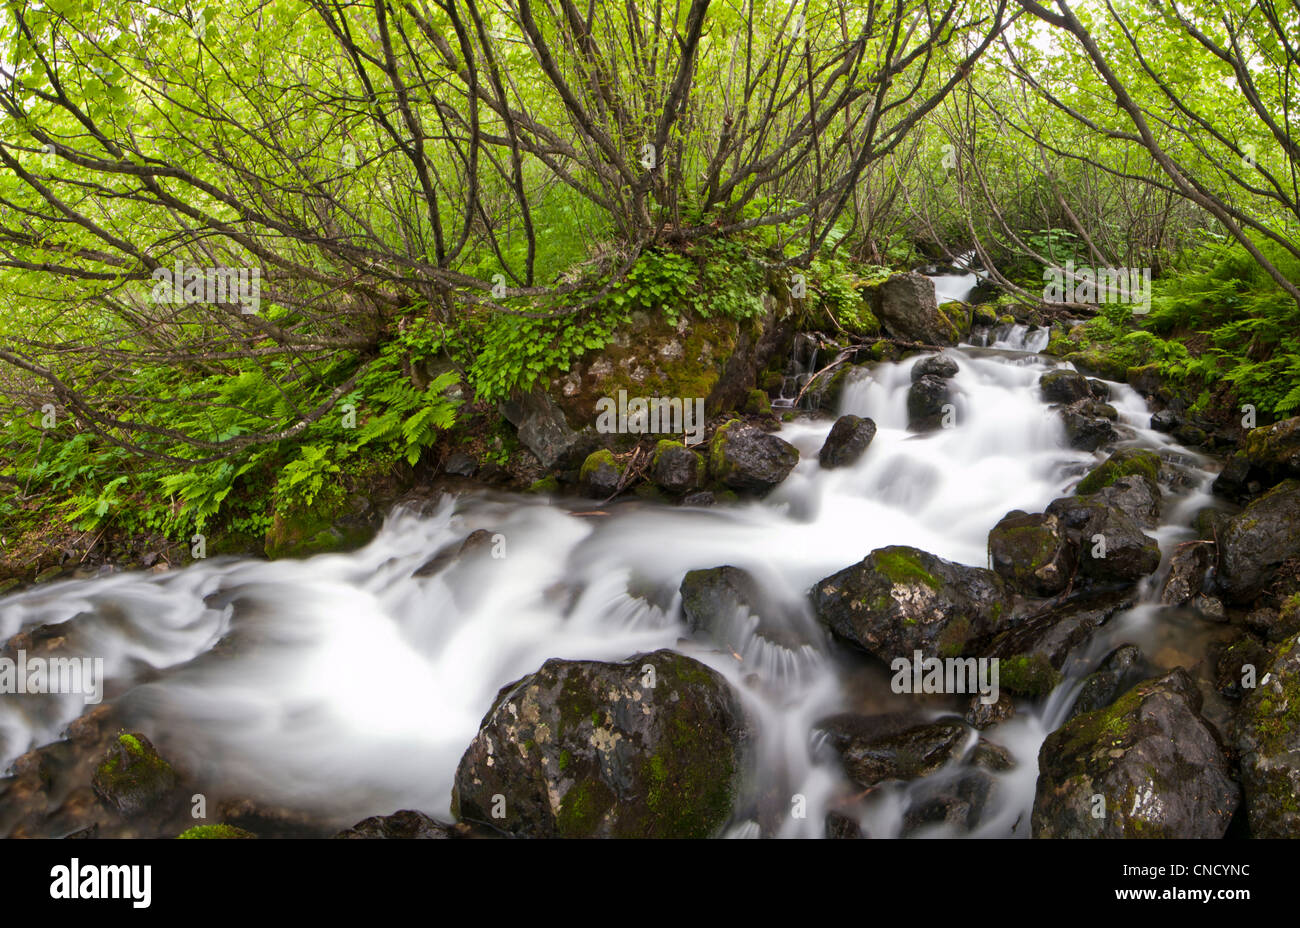 Falls Creek flows through a thicket of willows, Southcentral Alaska, Summer Stock Photo